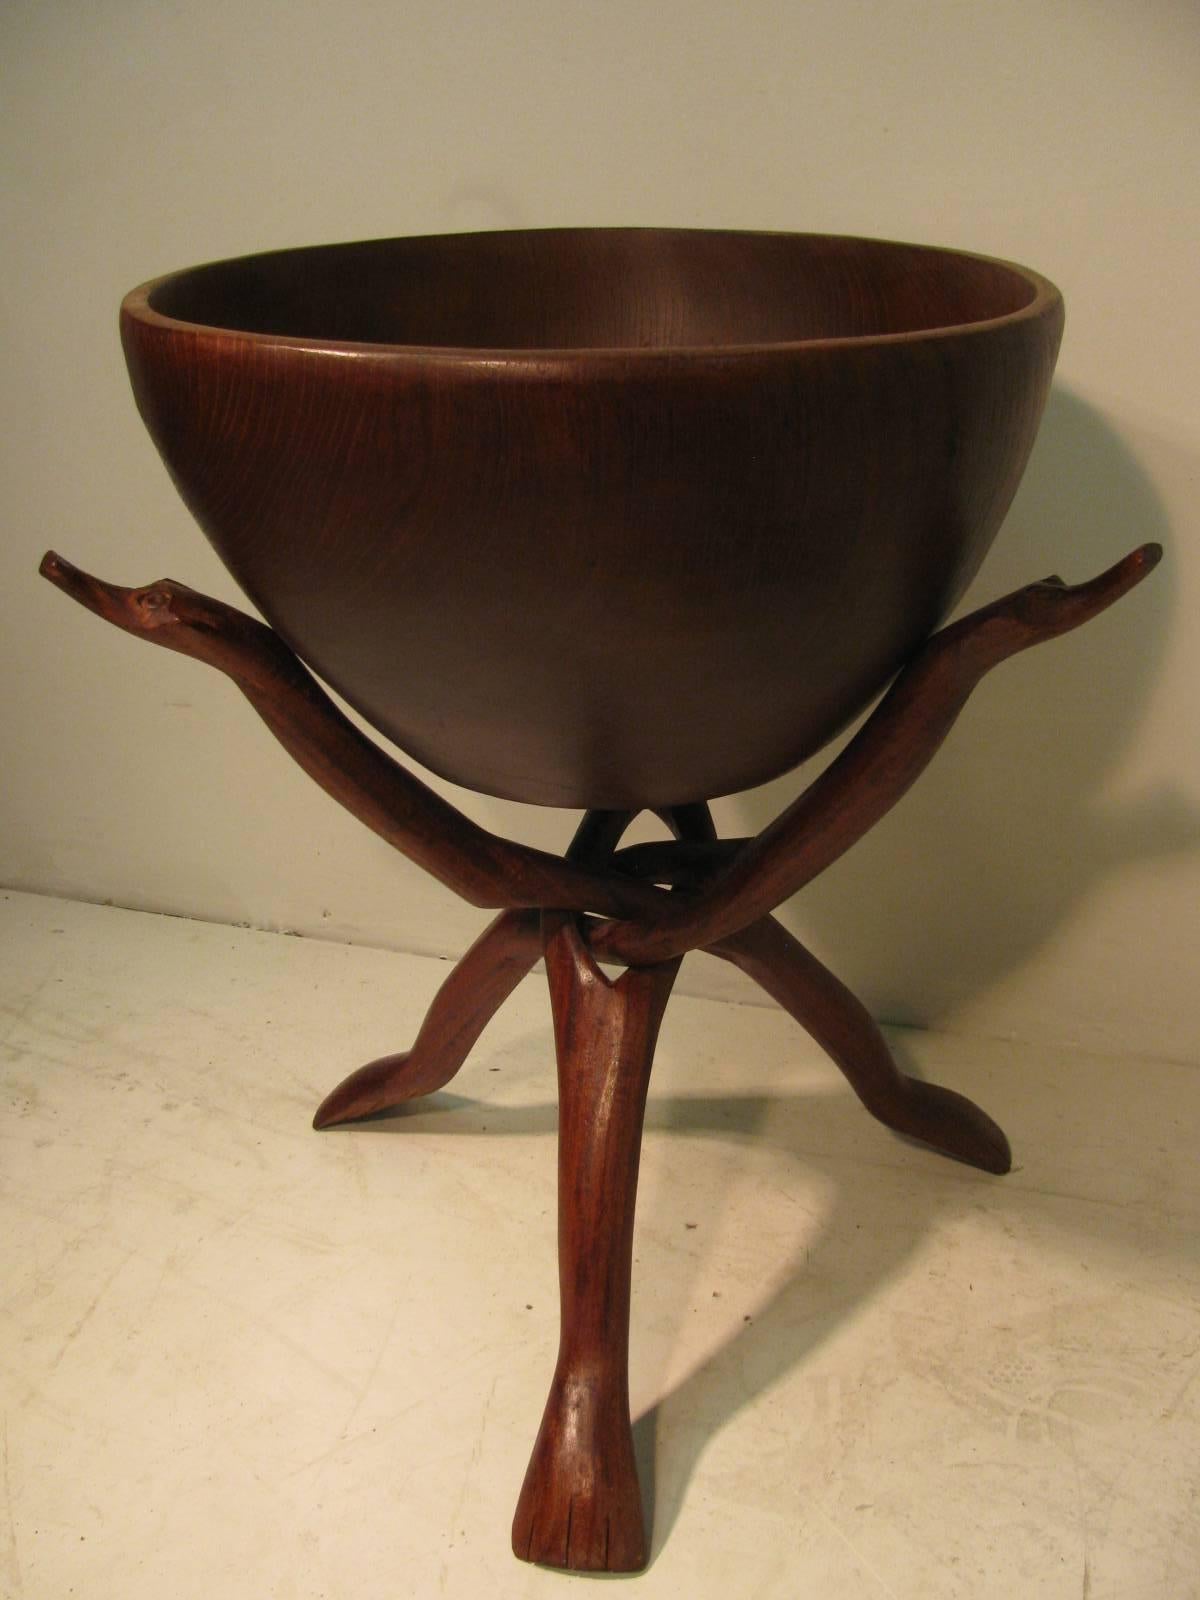 Fabulous teak plant stand and bowl which consists of a figural stand that is hand-carved and interlocked. Animal faces and feet carved into the base. Large bowl snugly sits in the cradle. Bowl is 15 W x 8 D.